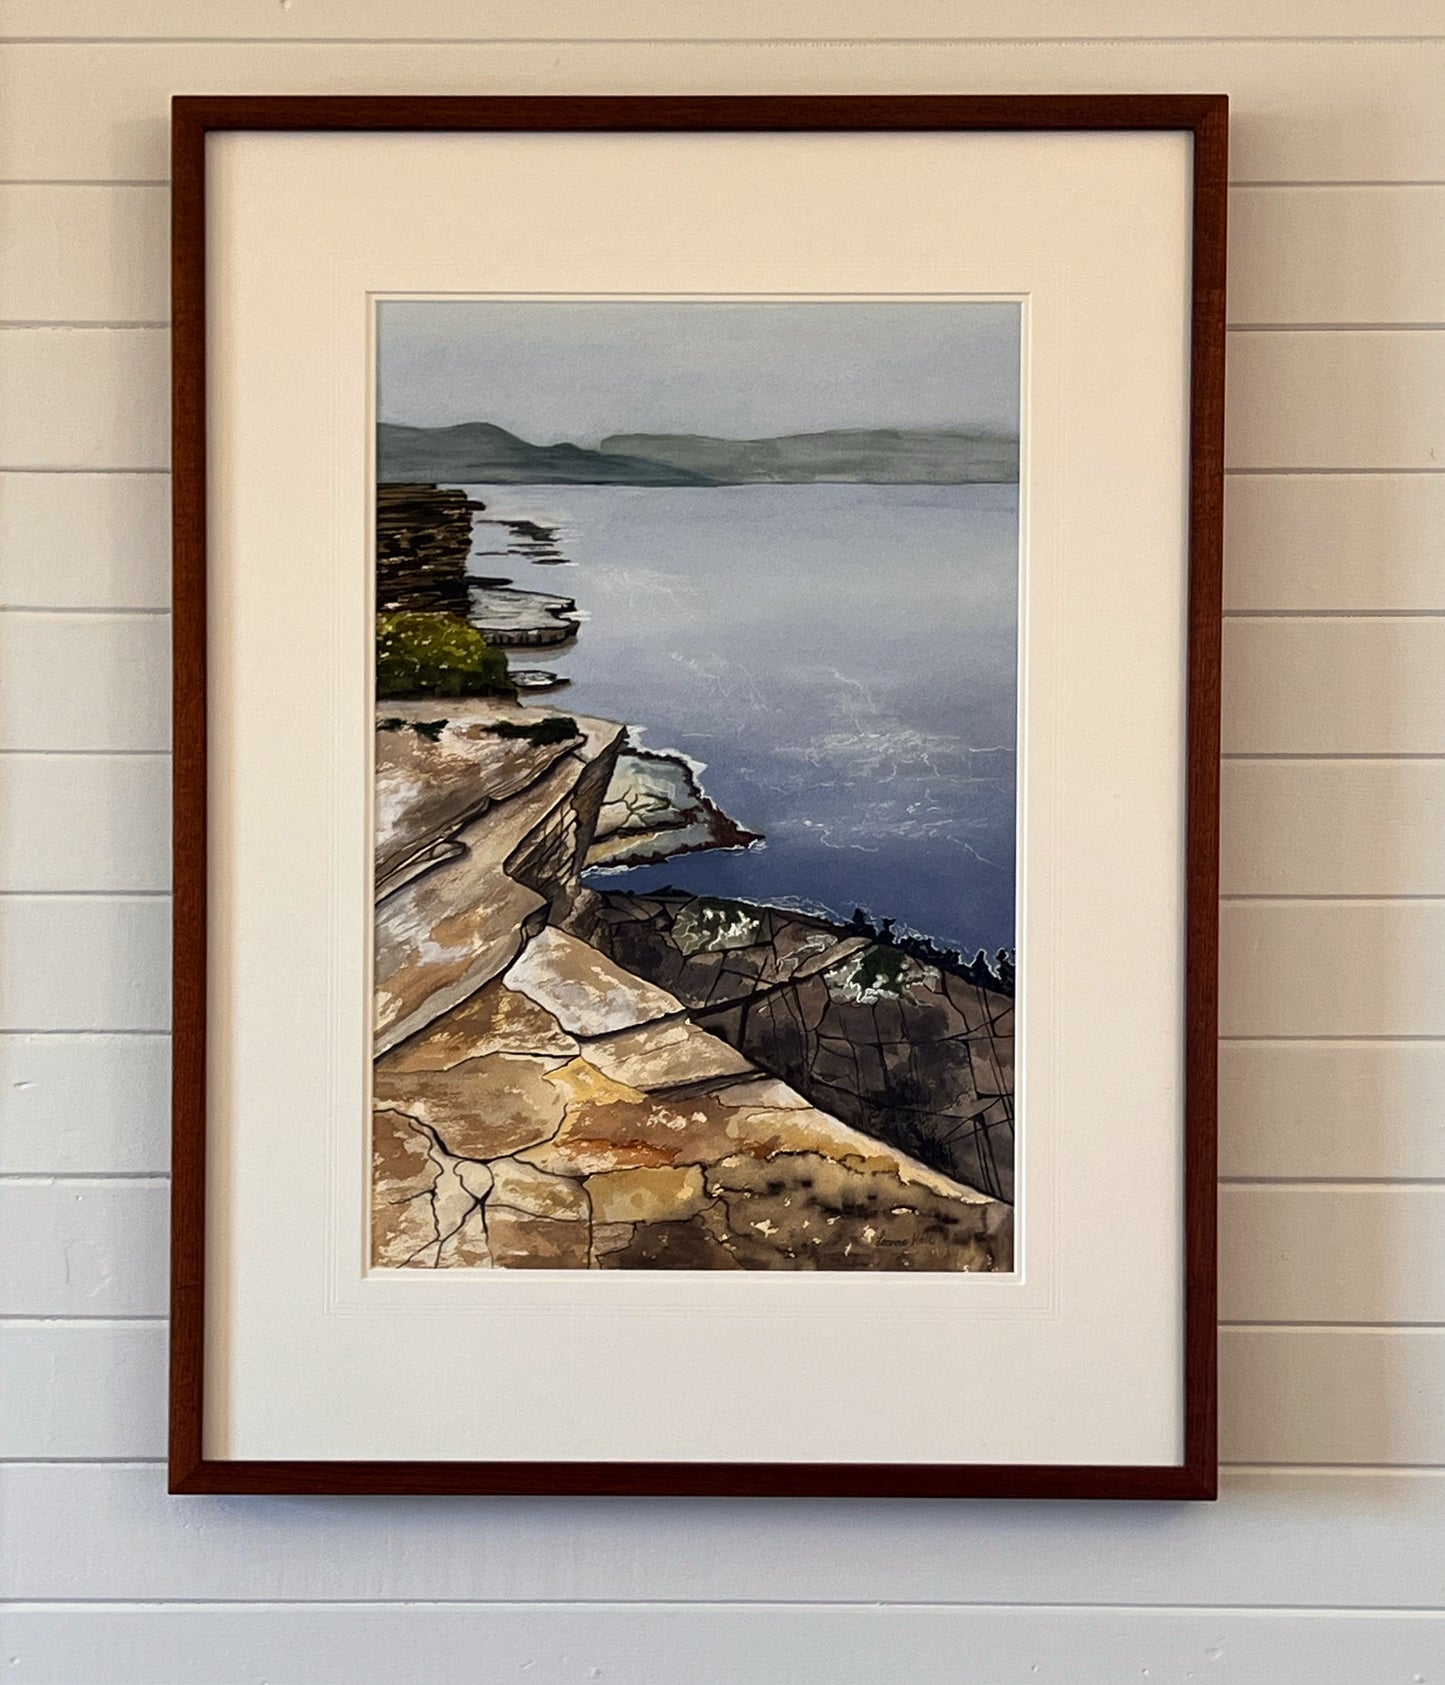 Misty Waters - framed watercolour painting by Leanne Hall